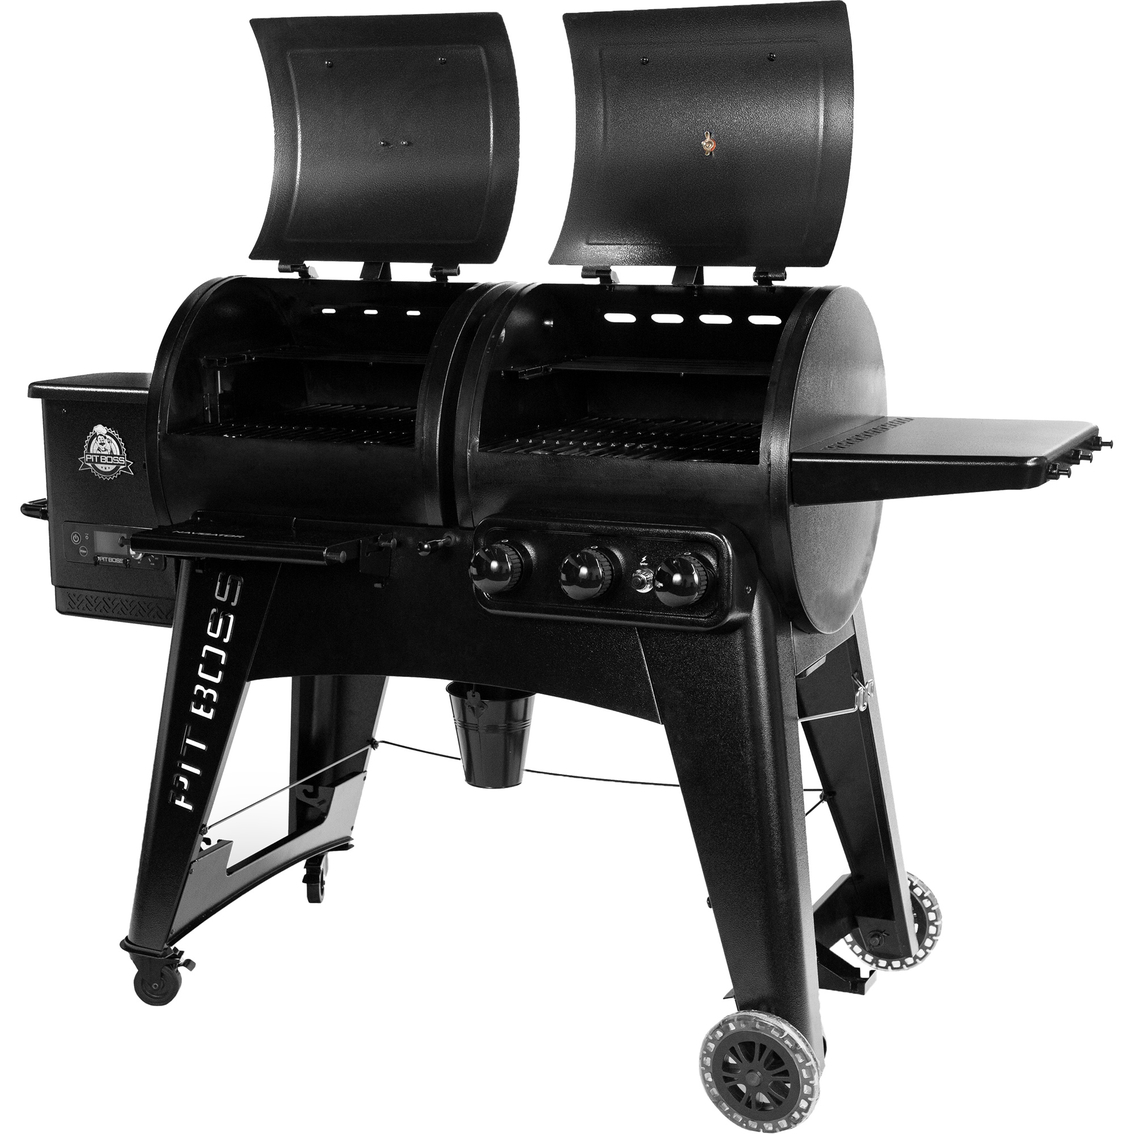 Pit Boss Combo 1230 Wood Pellet Grill - Image 4 of 6